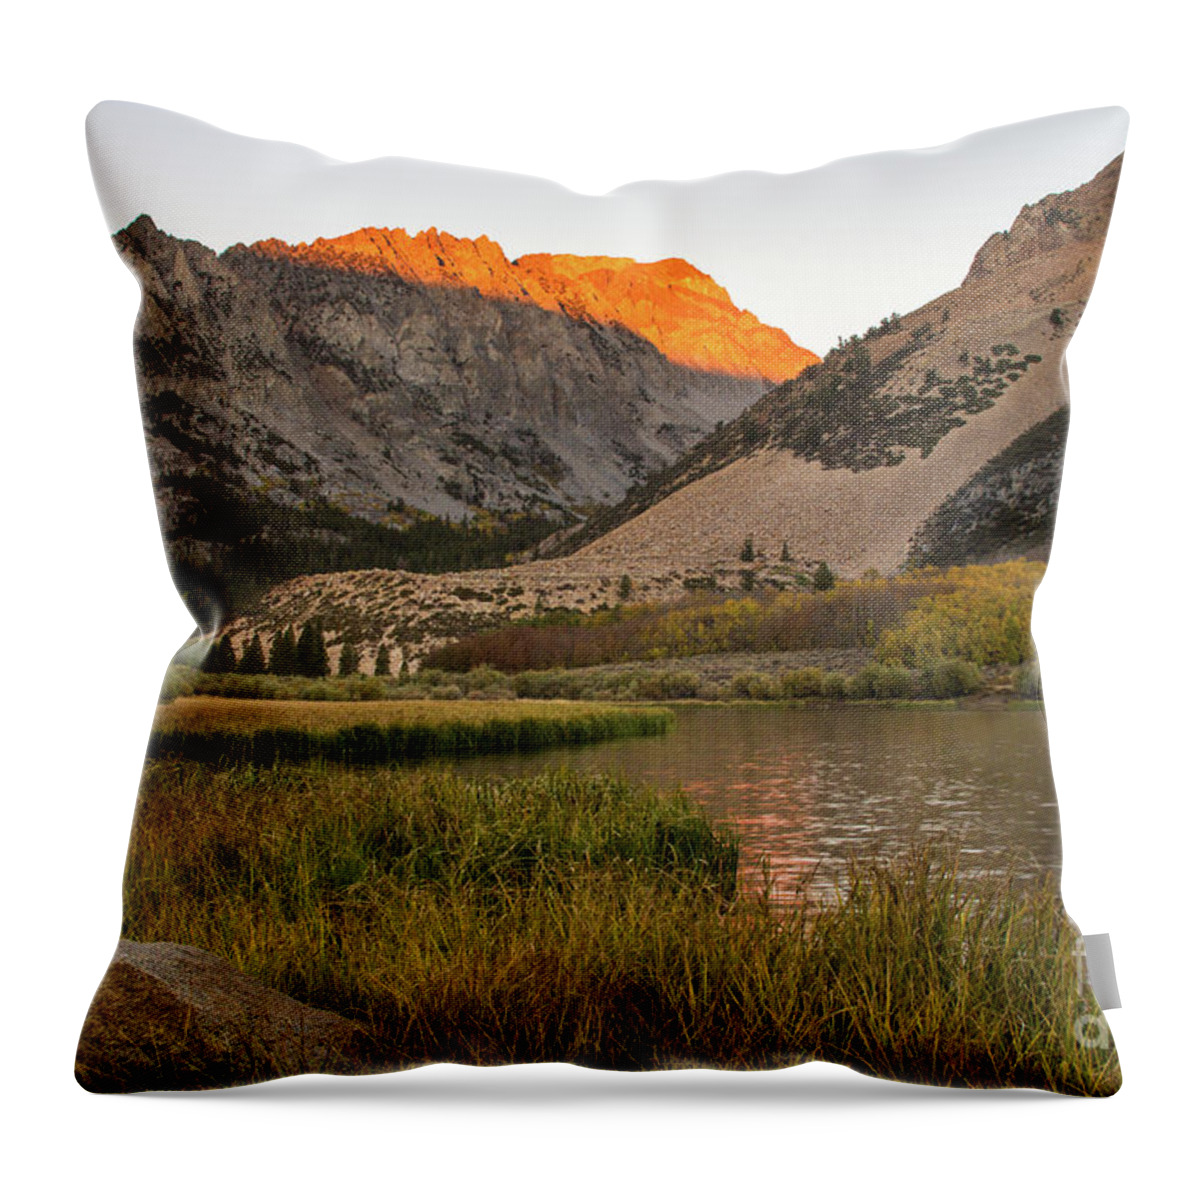 Mountains Throw Pillow featuring the photograph Morning Glow by Brandon Bonafede